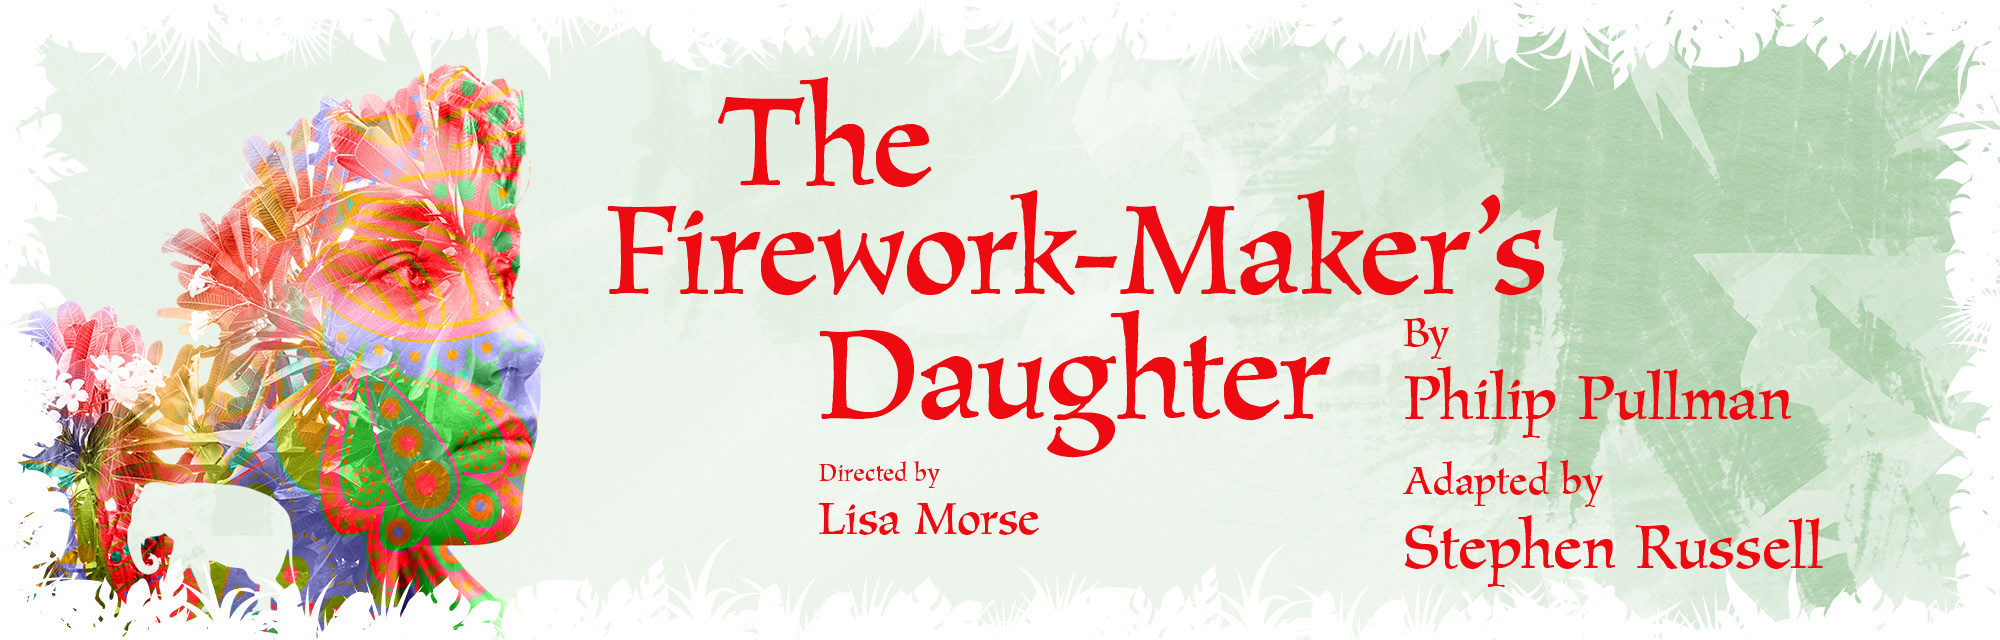 Firework-Maker's Daughter theme graphic